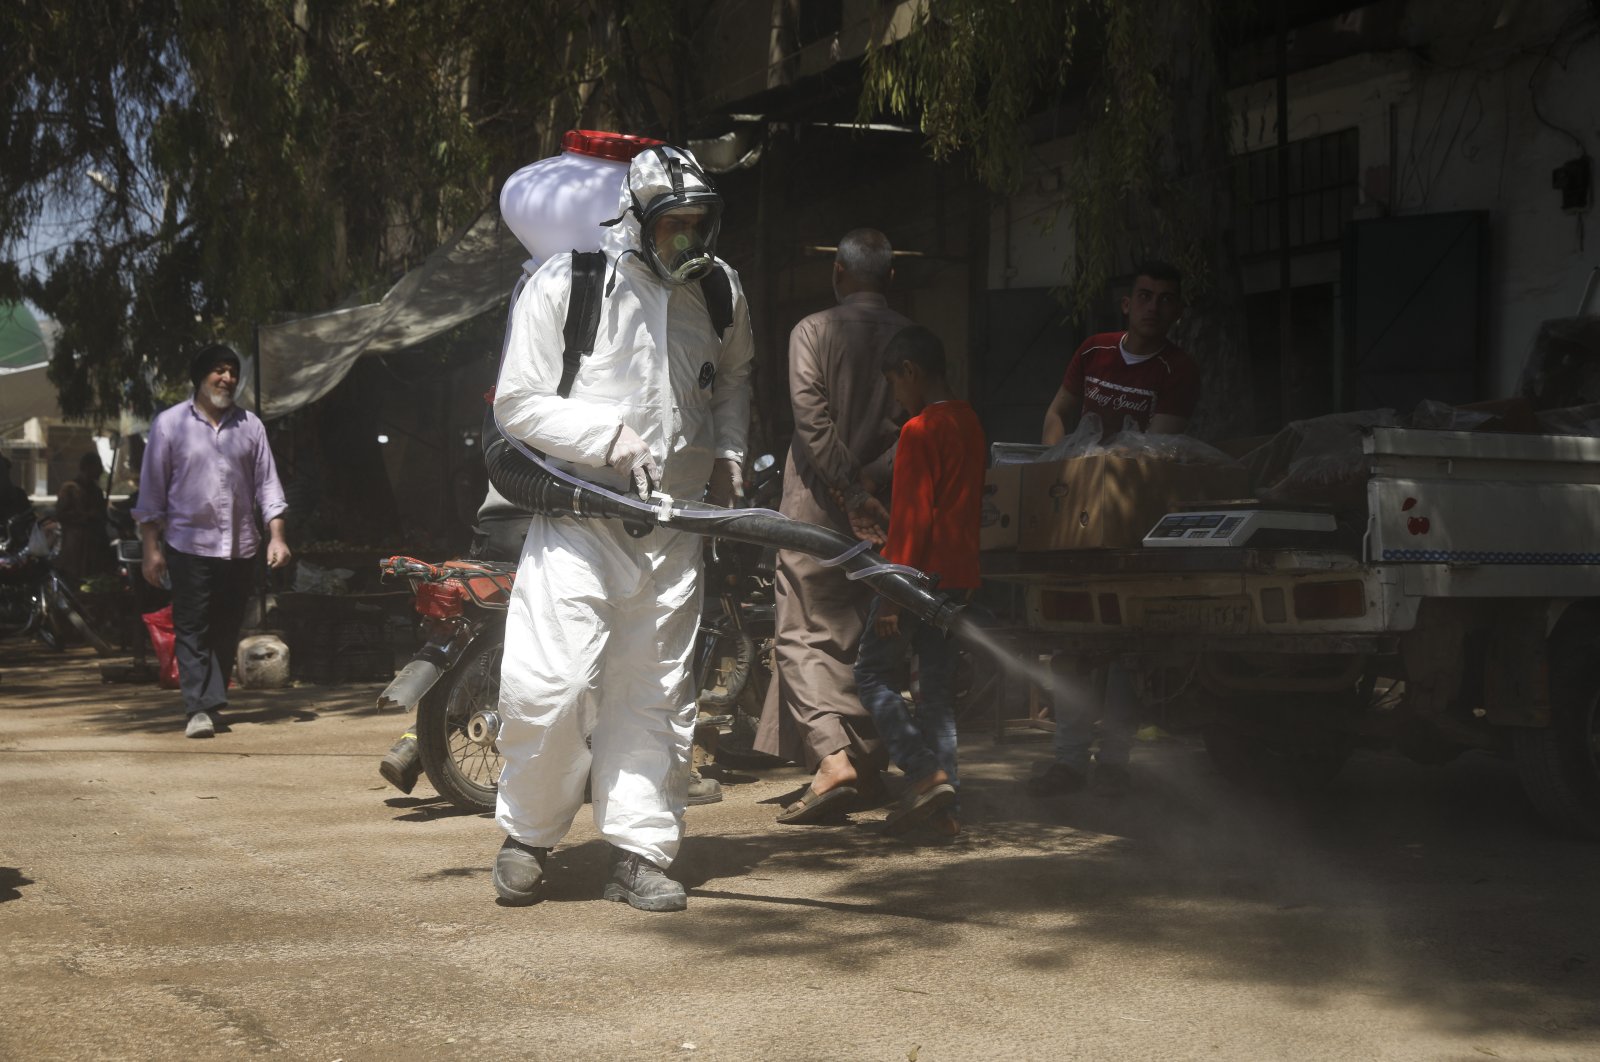 A member of a nongovernmental aid organization sprays disinfectant as a preventative measure against the coronavirus in the town of Armanaz, Idlib province, Syria, April 14, 2020. (AP Photo)